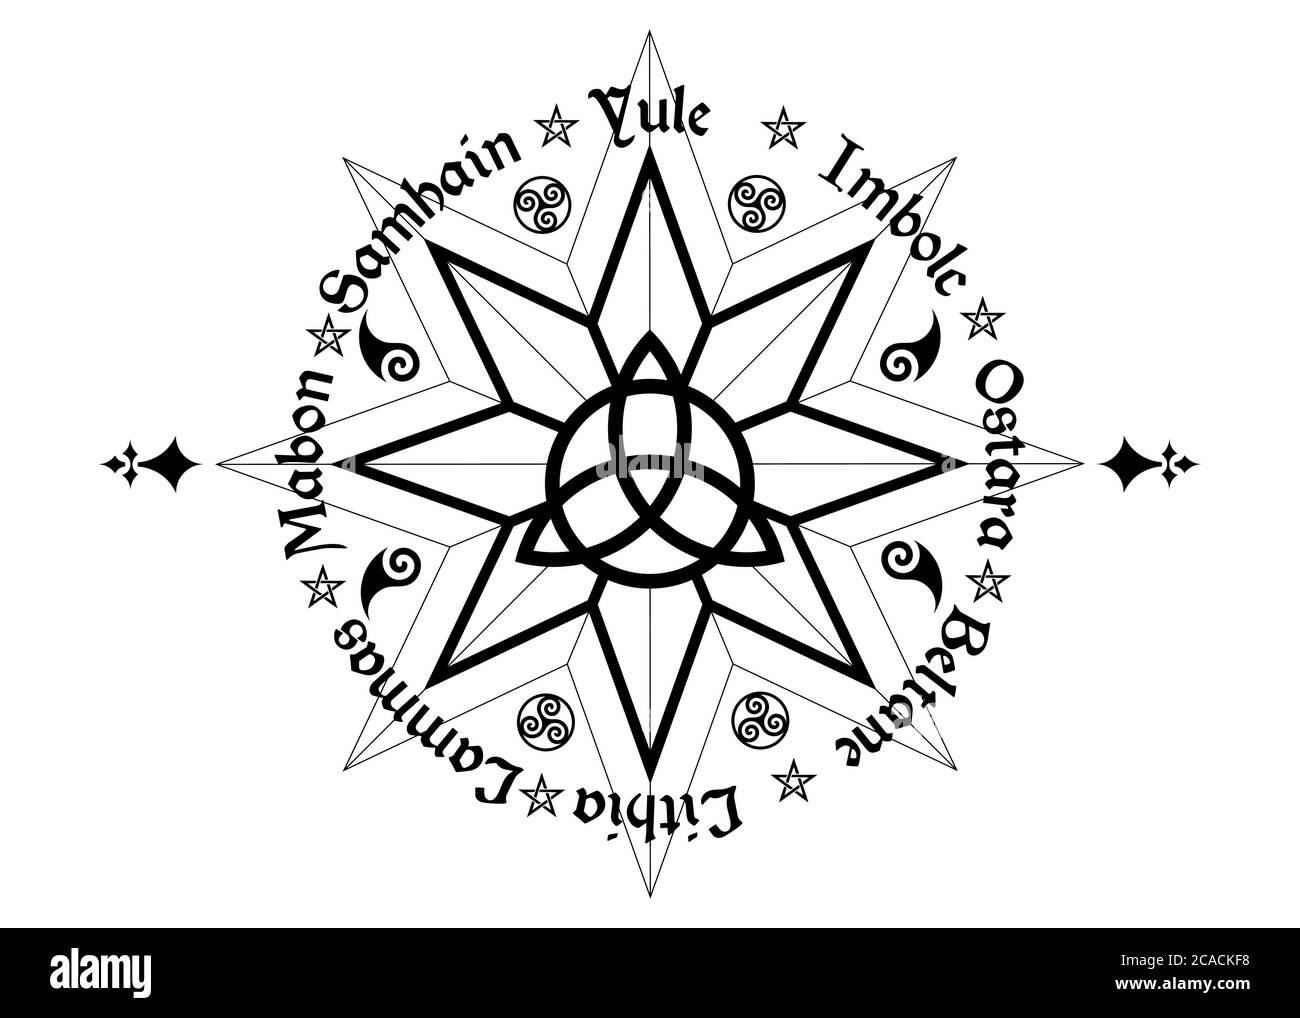 Book Of Shadows Wheel Of The Year Modern Paganism Wicca. Wiccan calendar and holidays. Compass with in the middle Triquetra symbol from charmed celtic Stock Vector